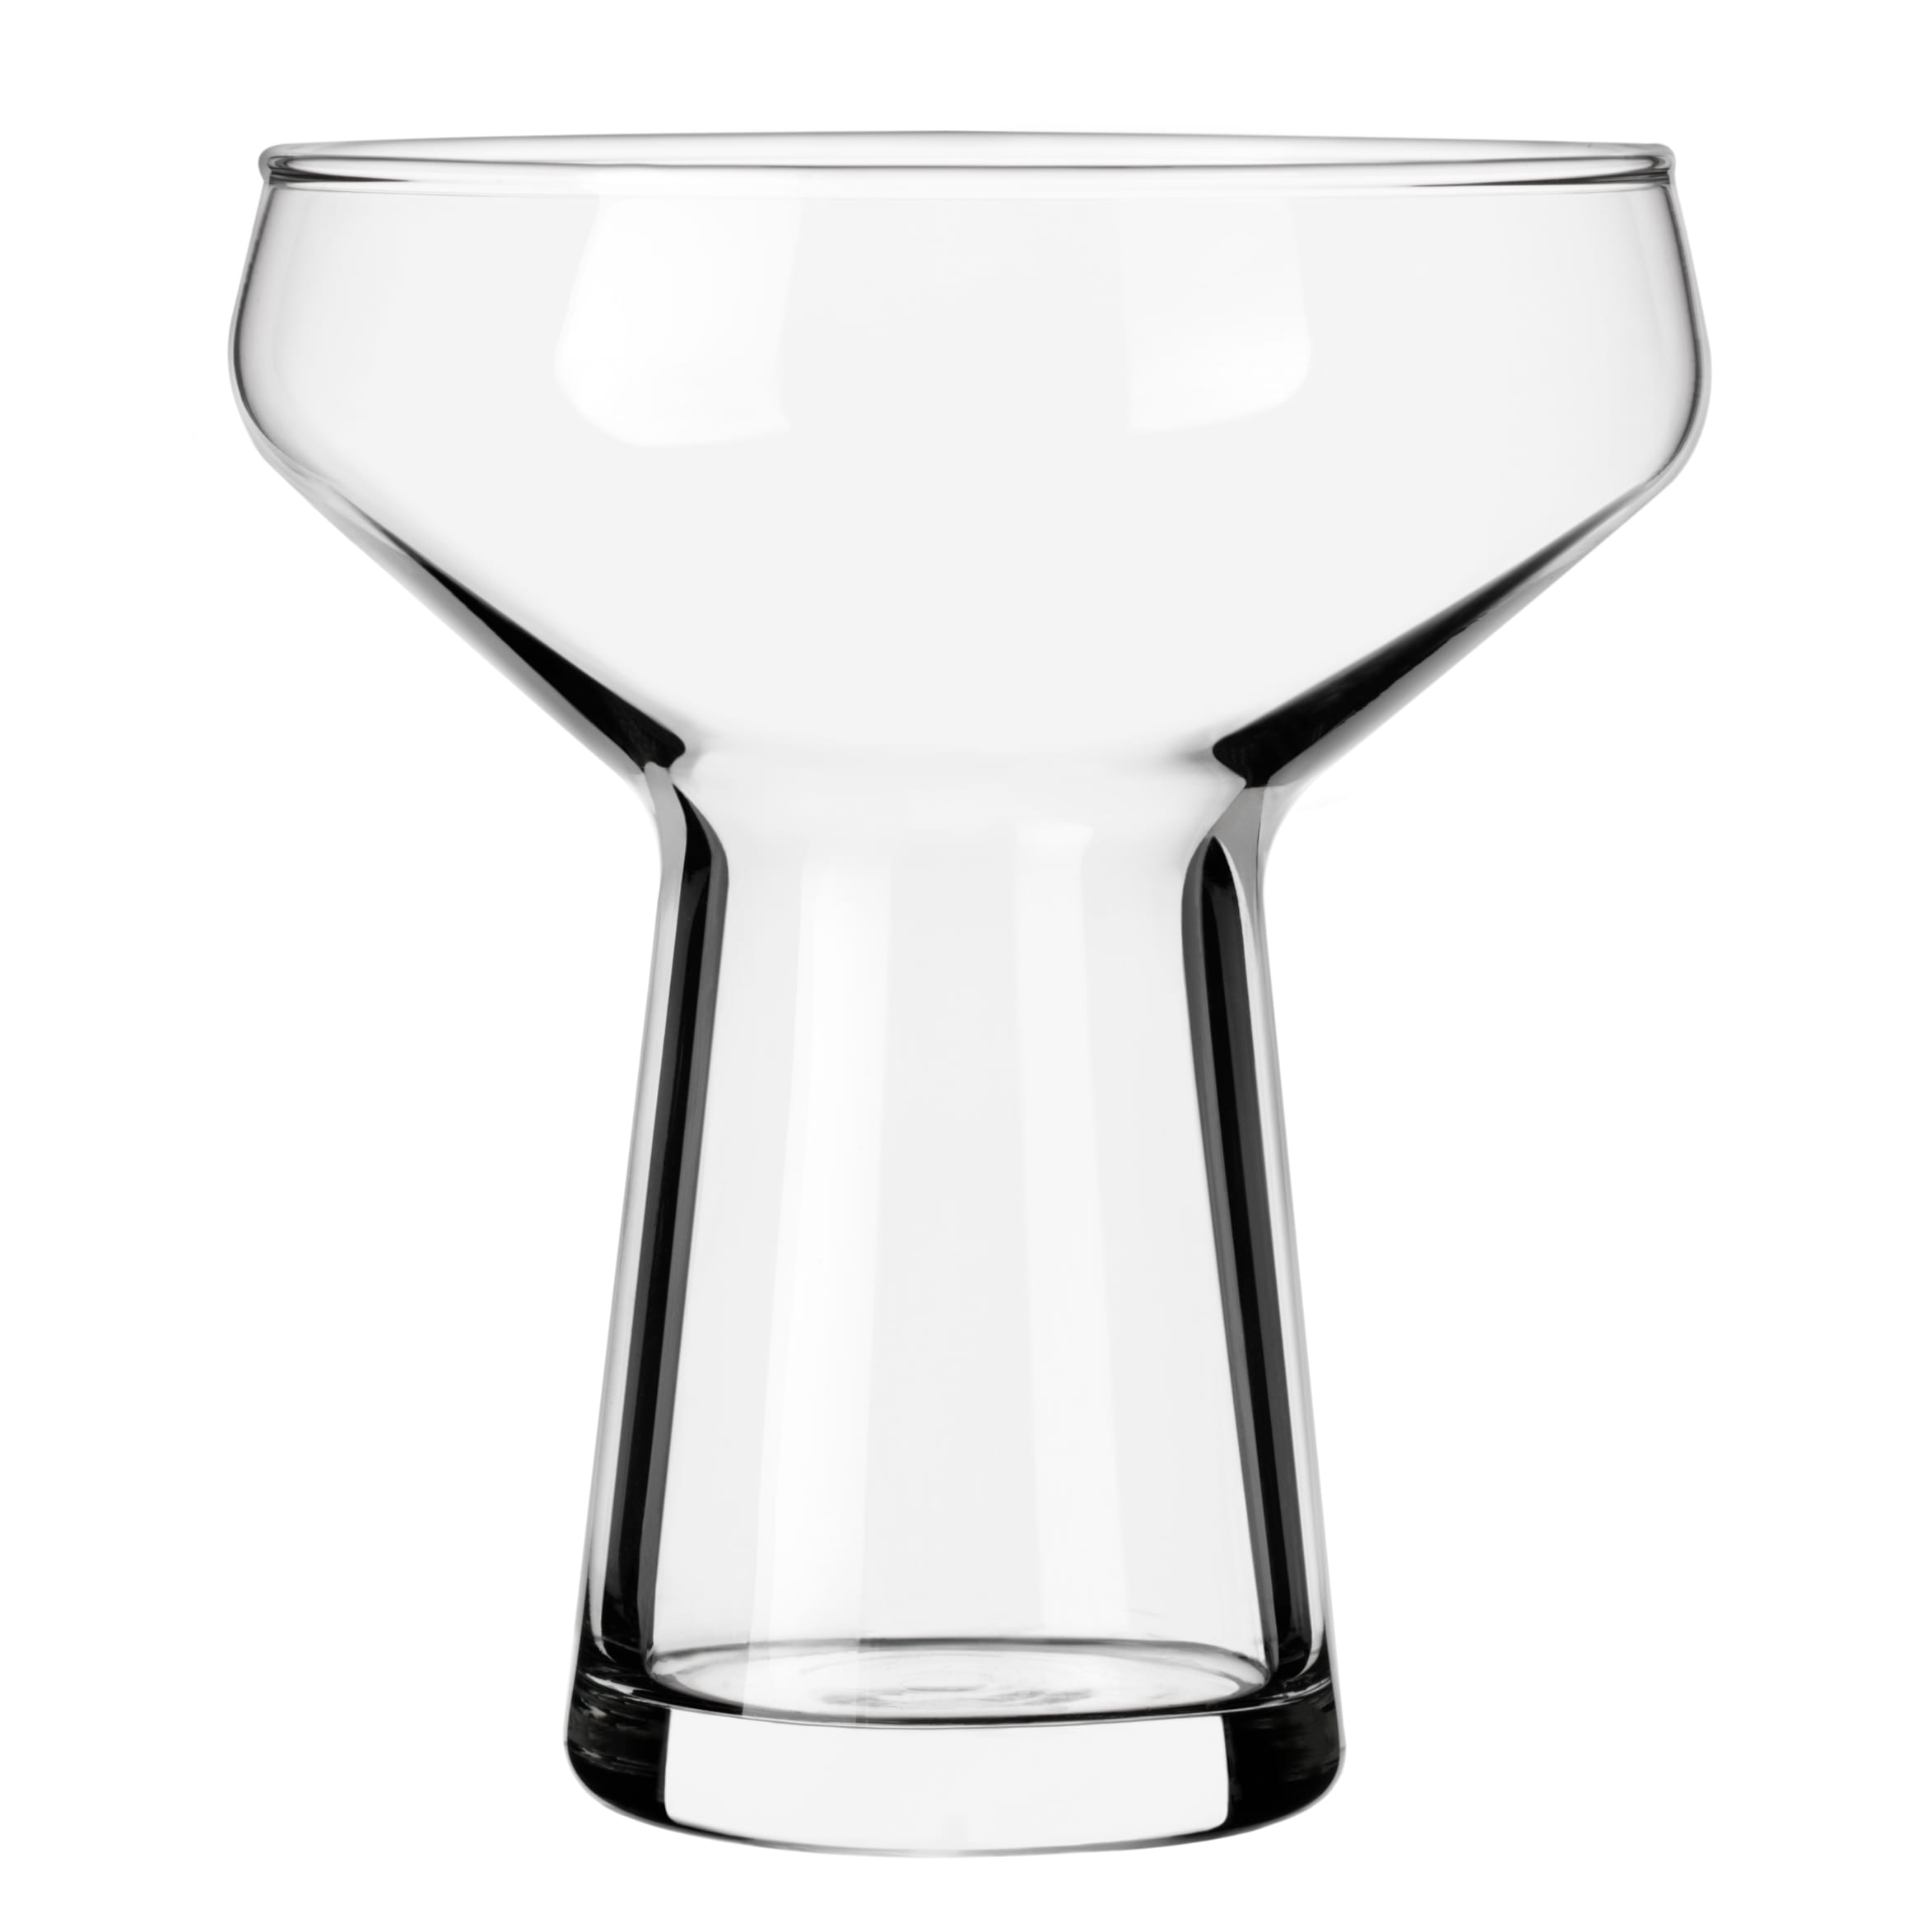 Libbey 1102 Symbio Coupe Glass, 14 Ounce, Clear